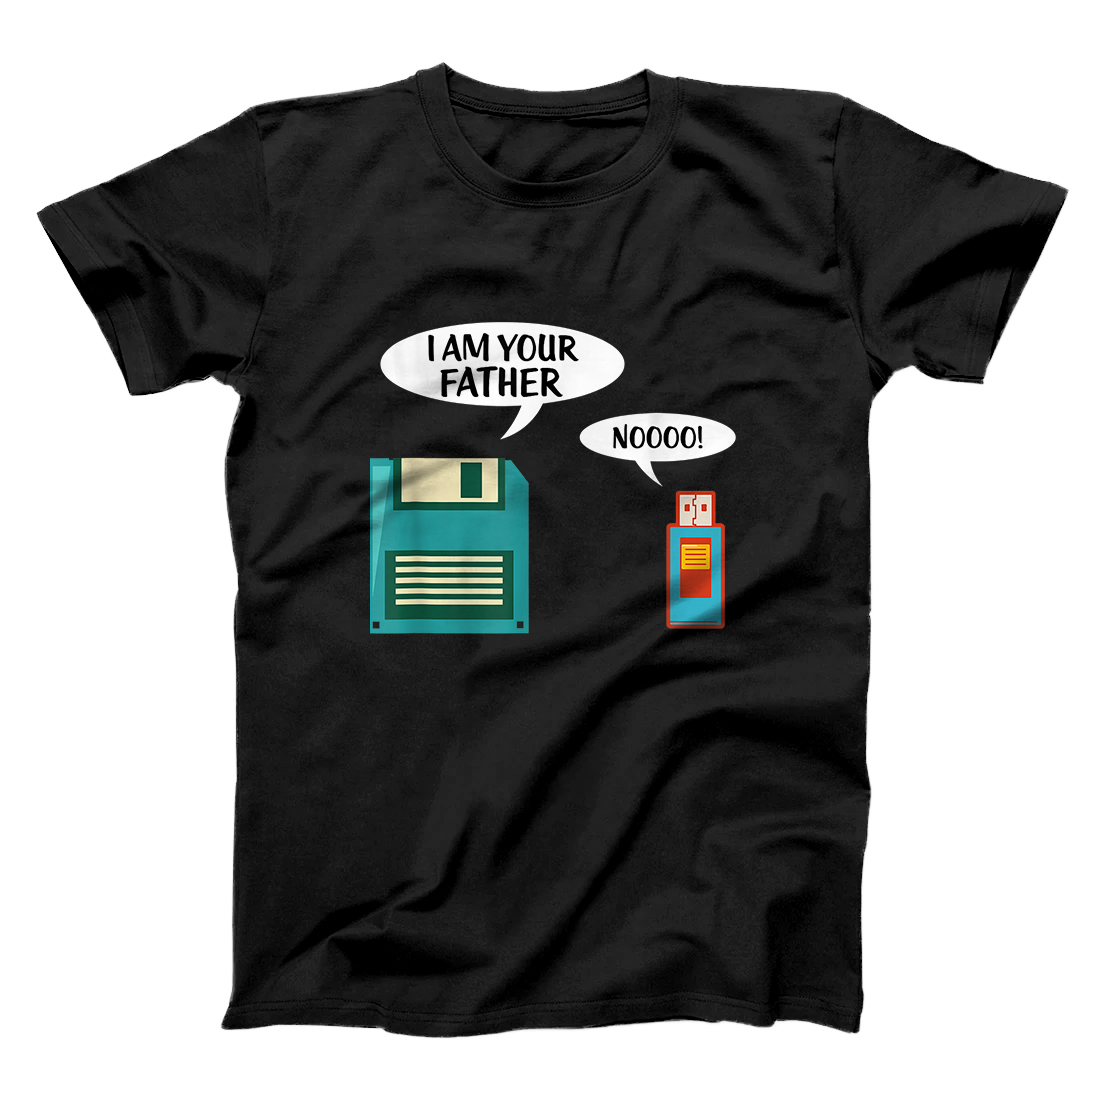 Personalized I Am Your Father Shirt USB Floppy Disk IT Computer Geek Nerd T-Shirt